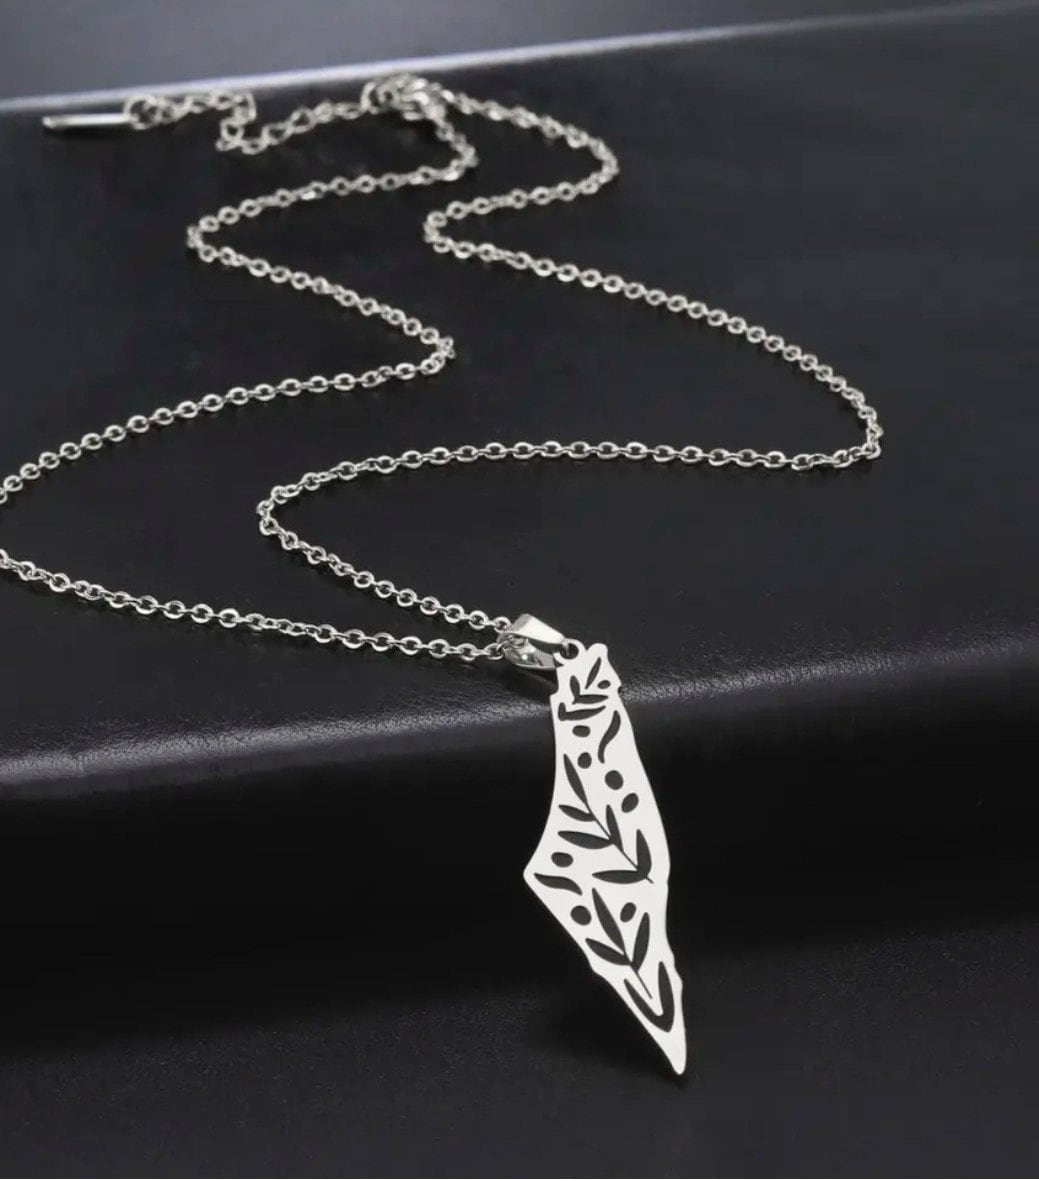 Palestine Stainless Steel Necklace Chain Pendant – Arabian Jewelry